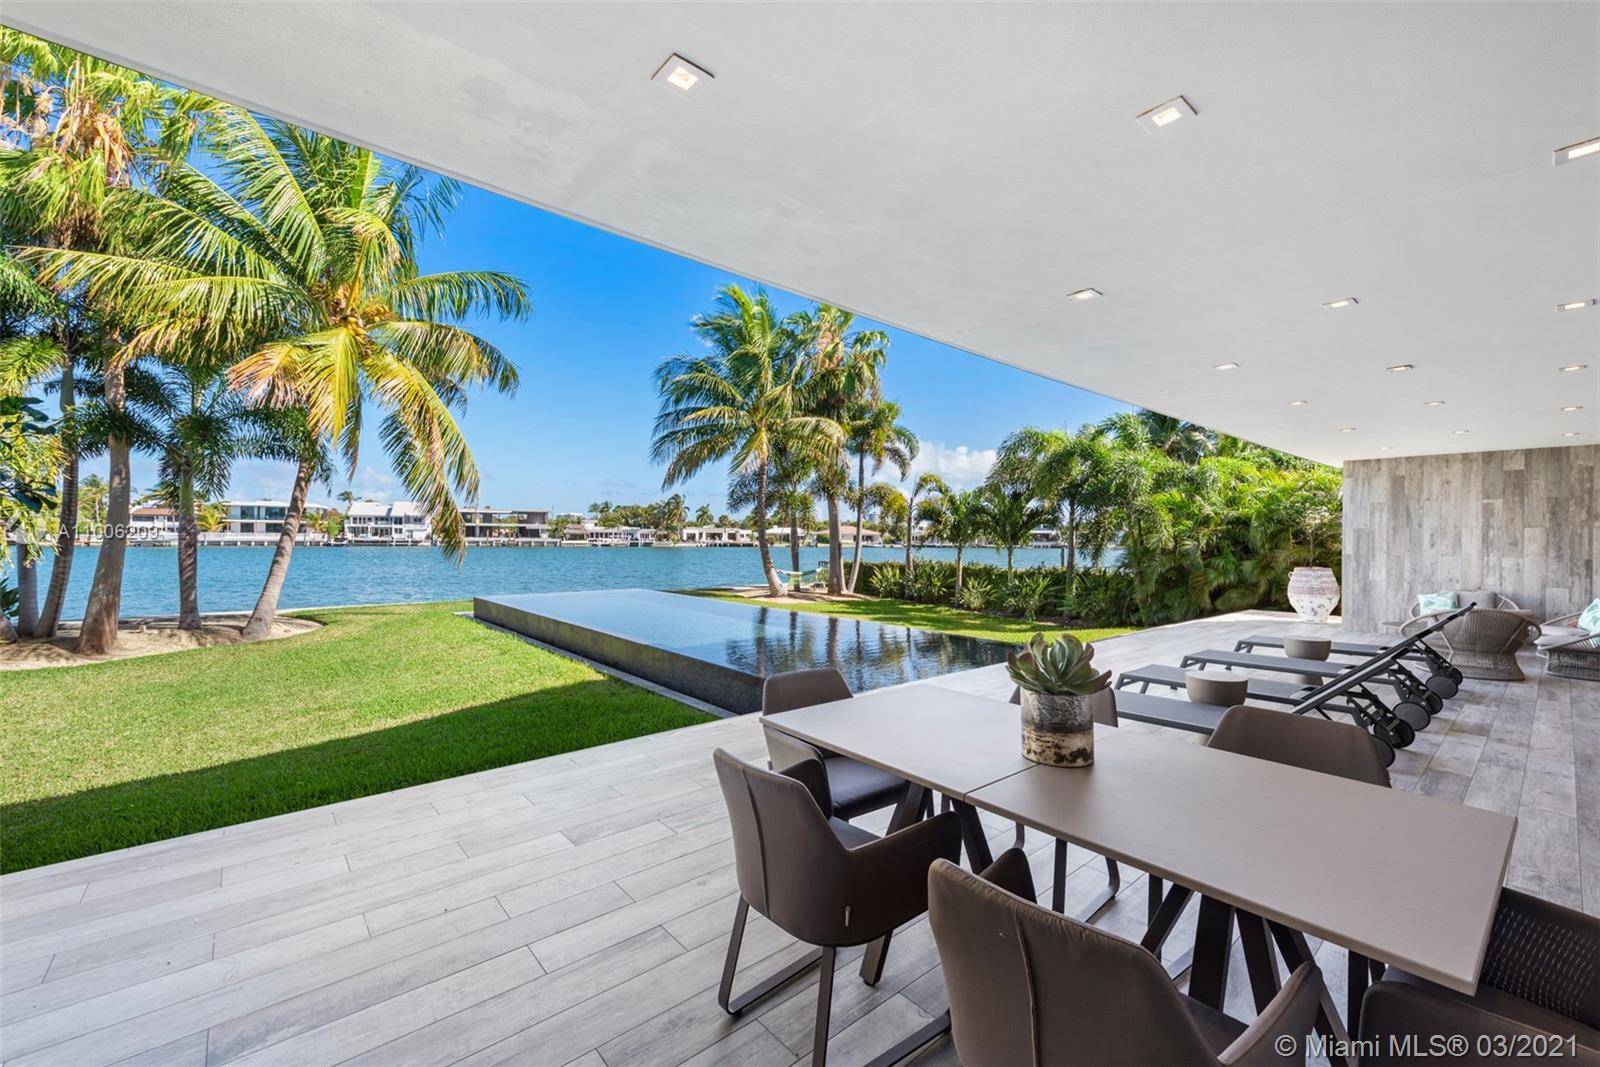 NEW CONSTRUCTION WATERFRONT MASTERPIECE located in Miami Beach gated community of Normandy Shores.